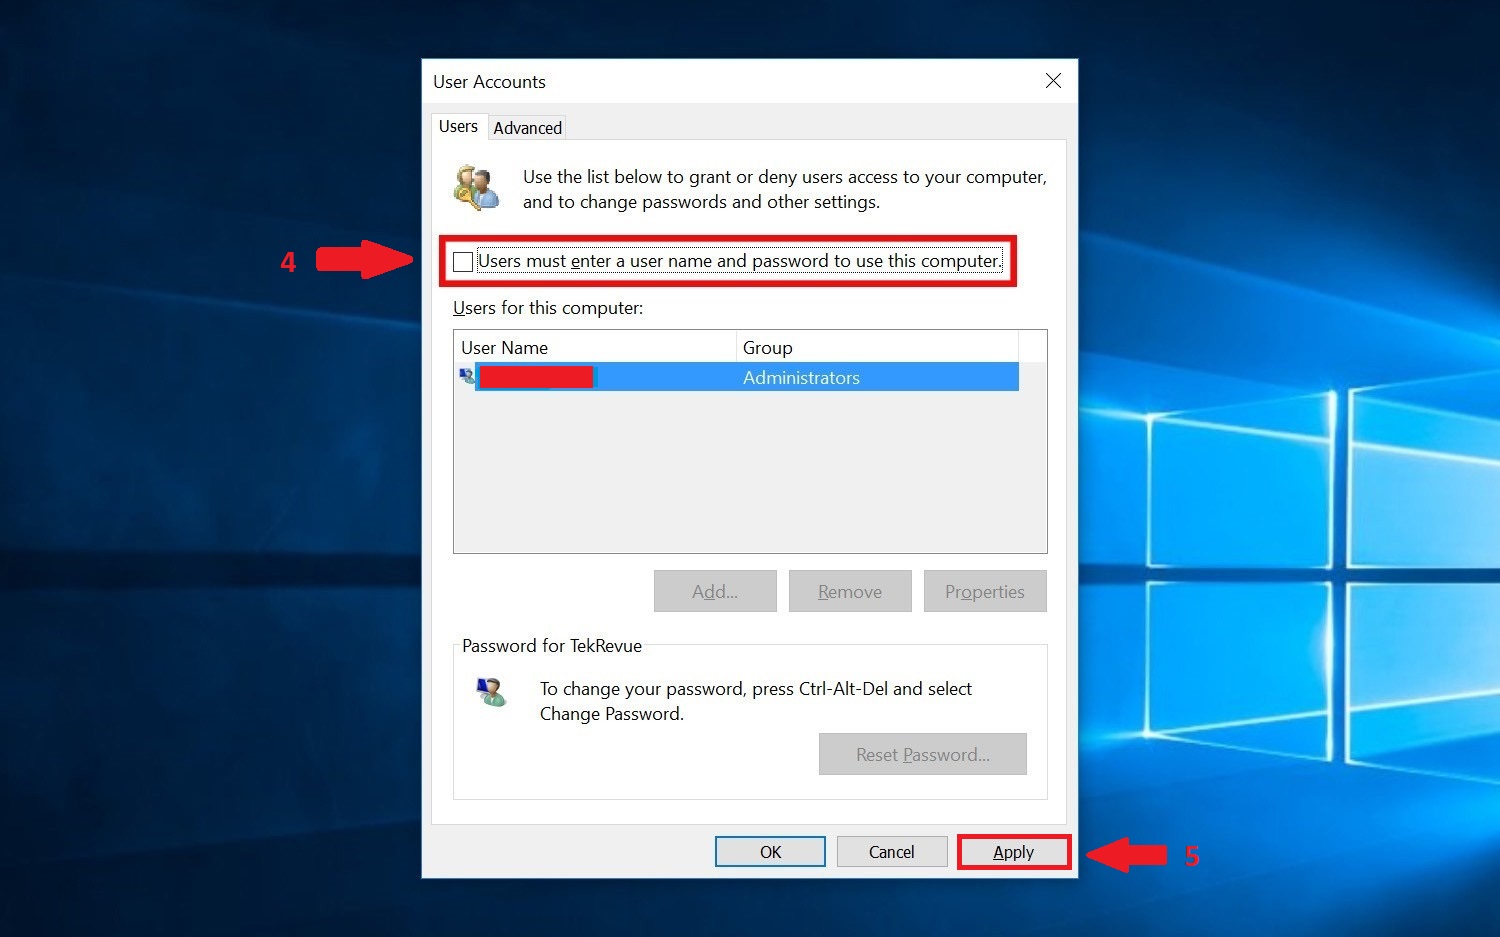 How to Uninstall Product Key to Deactivate Windows 10